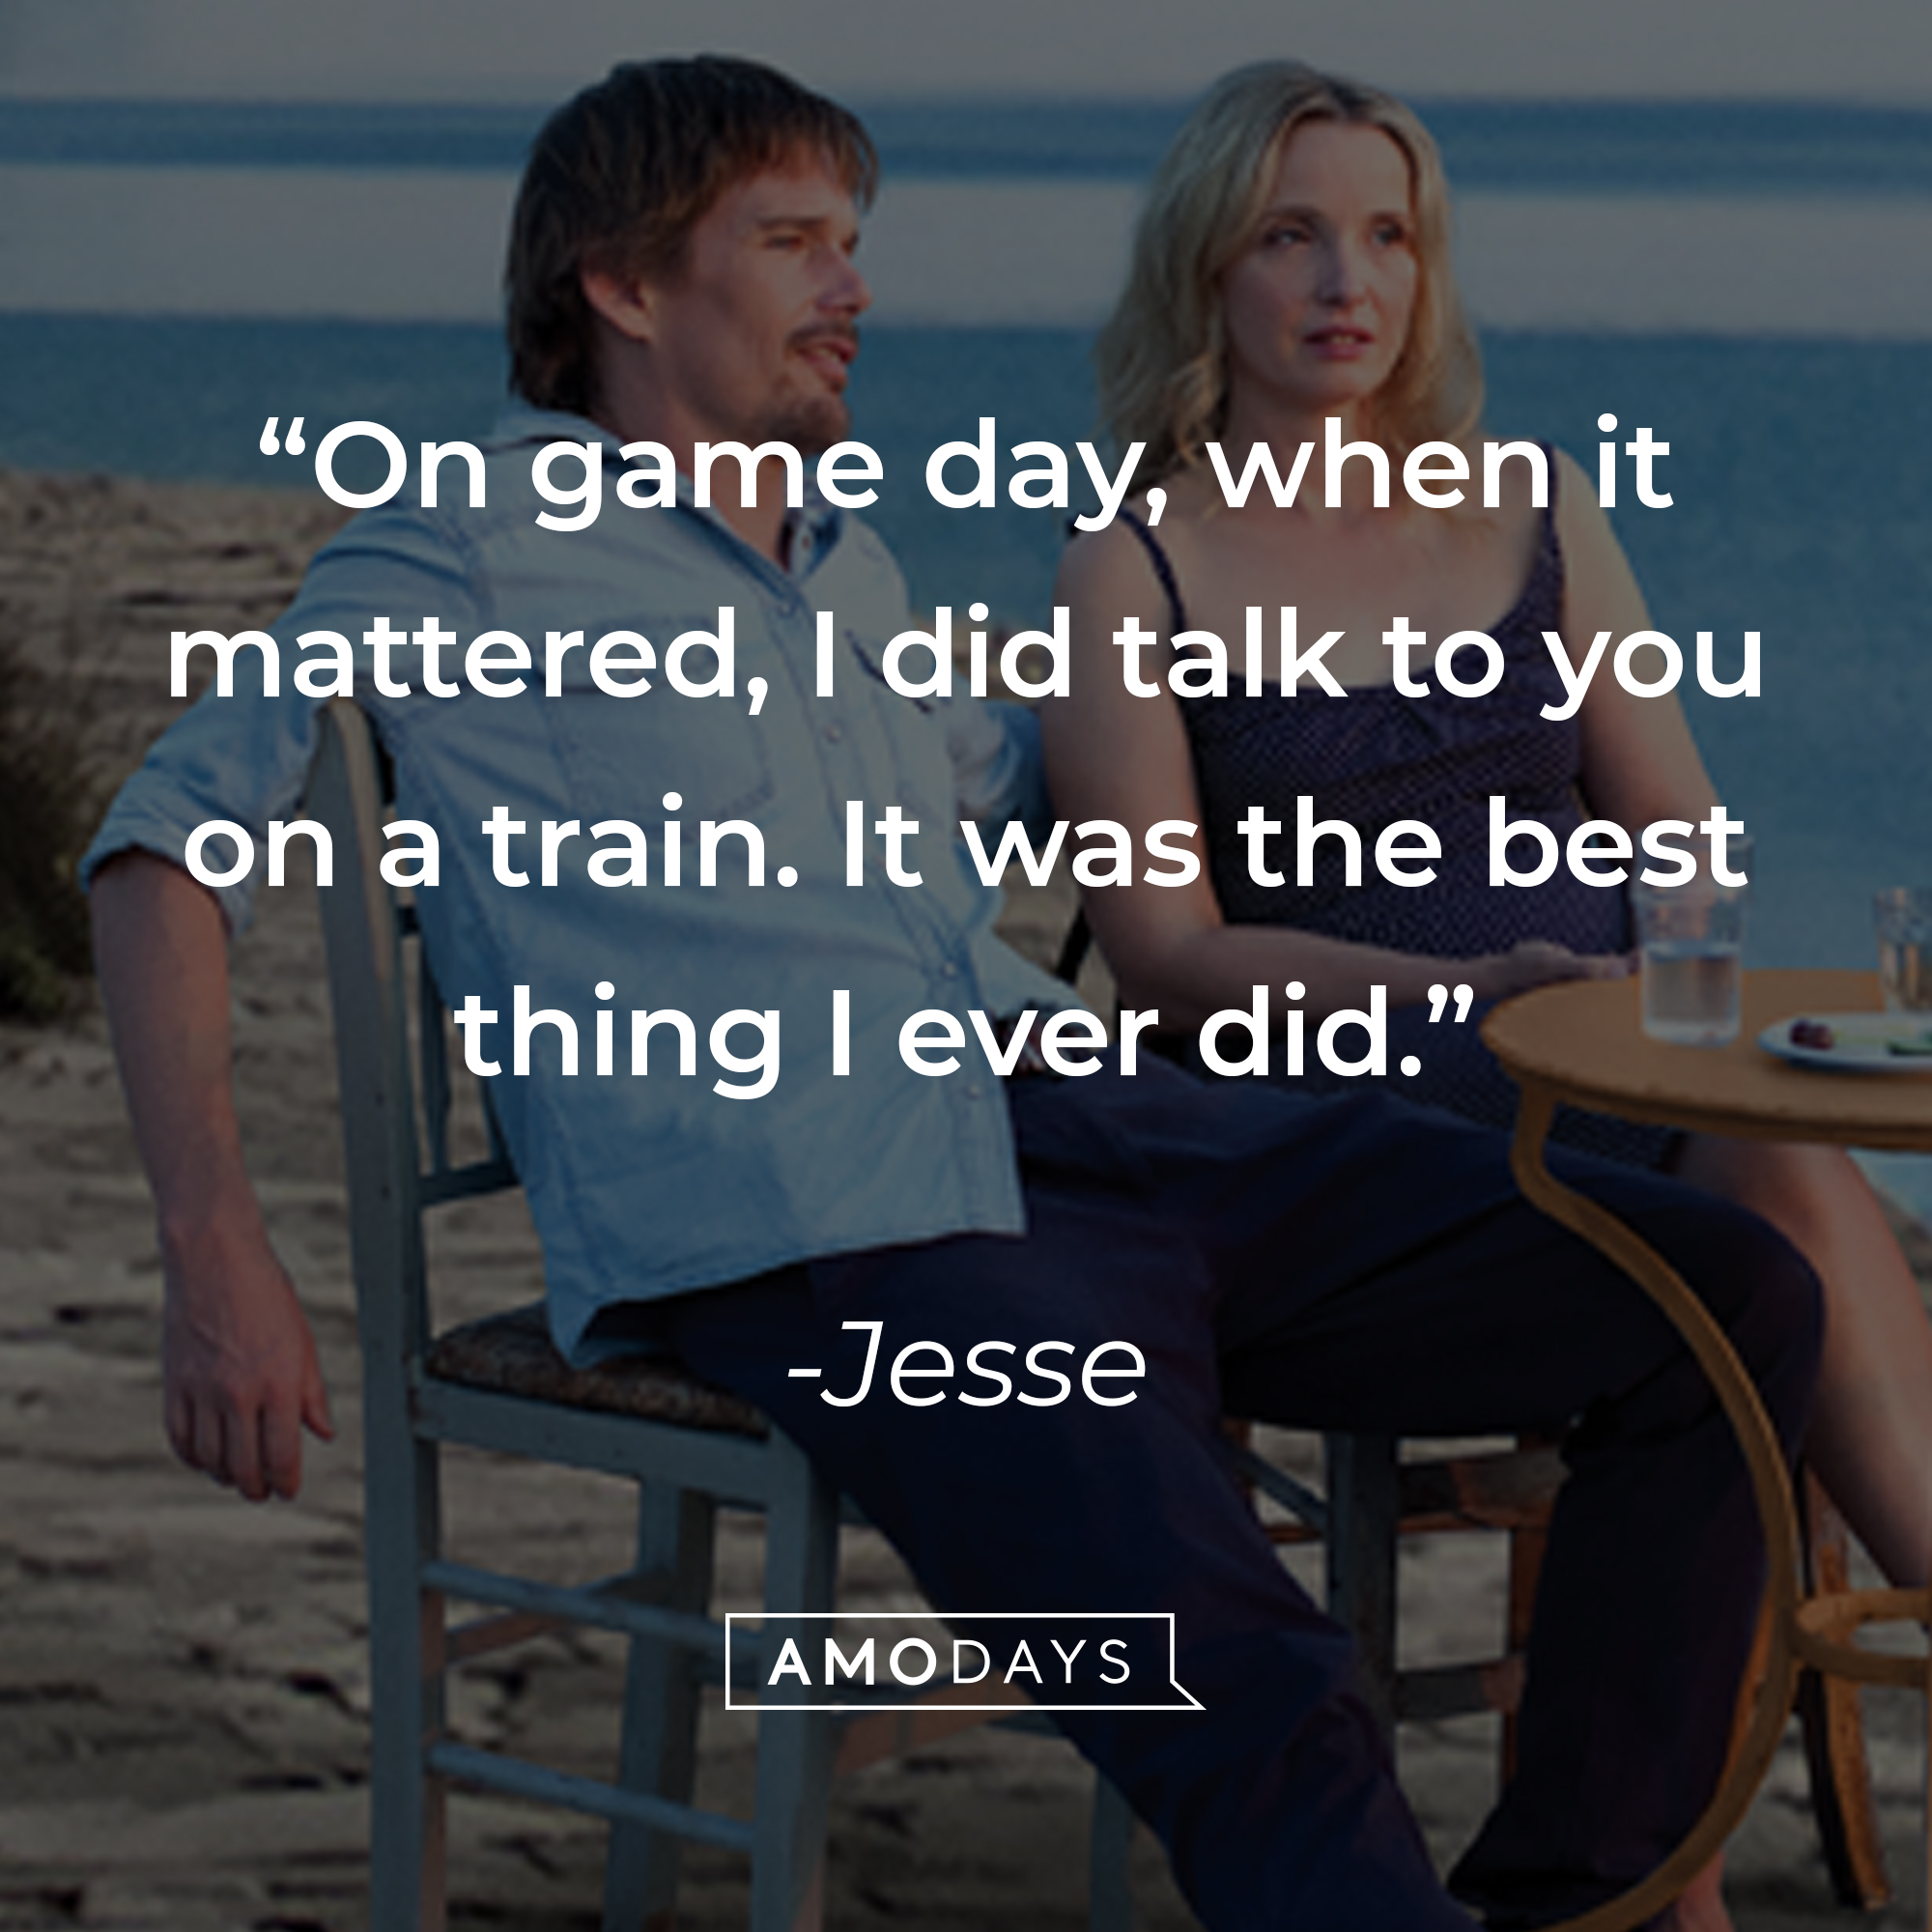 Jesse and Celine, with Jesse’s quote: “On game day, when it mattered, I did talk to you on a train. It was the best thing I ever did.” │Source: facebook.com/BeforeMidnightFilm